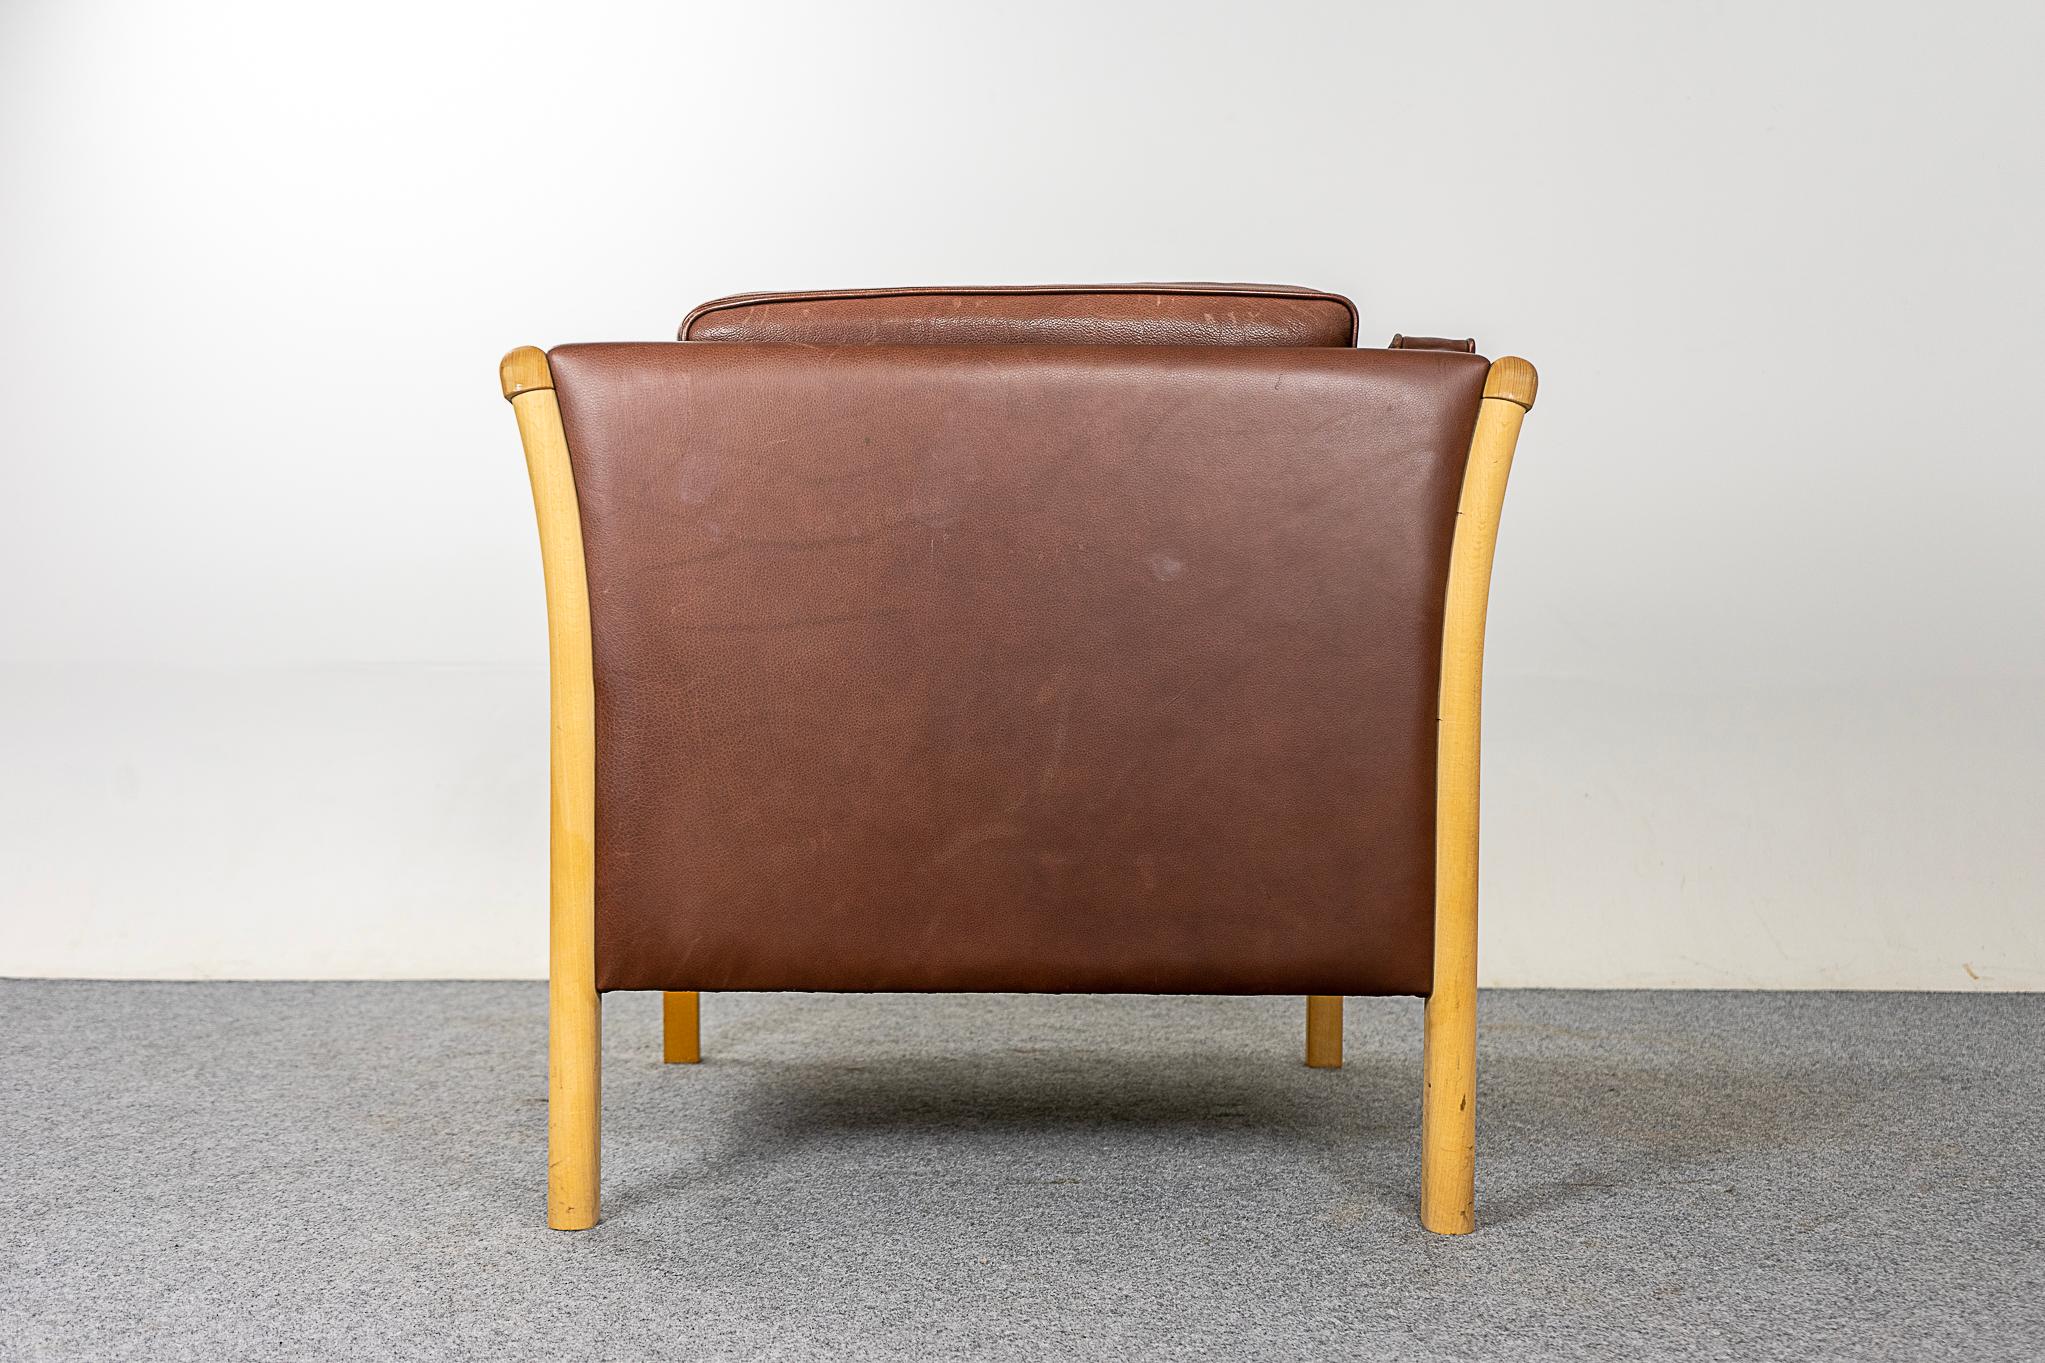 Danish Mid-Century Beech & Leather Lounge Chair For Sale 5